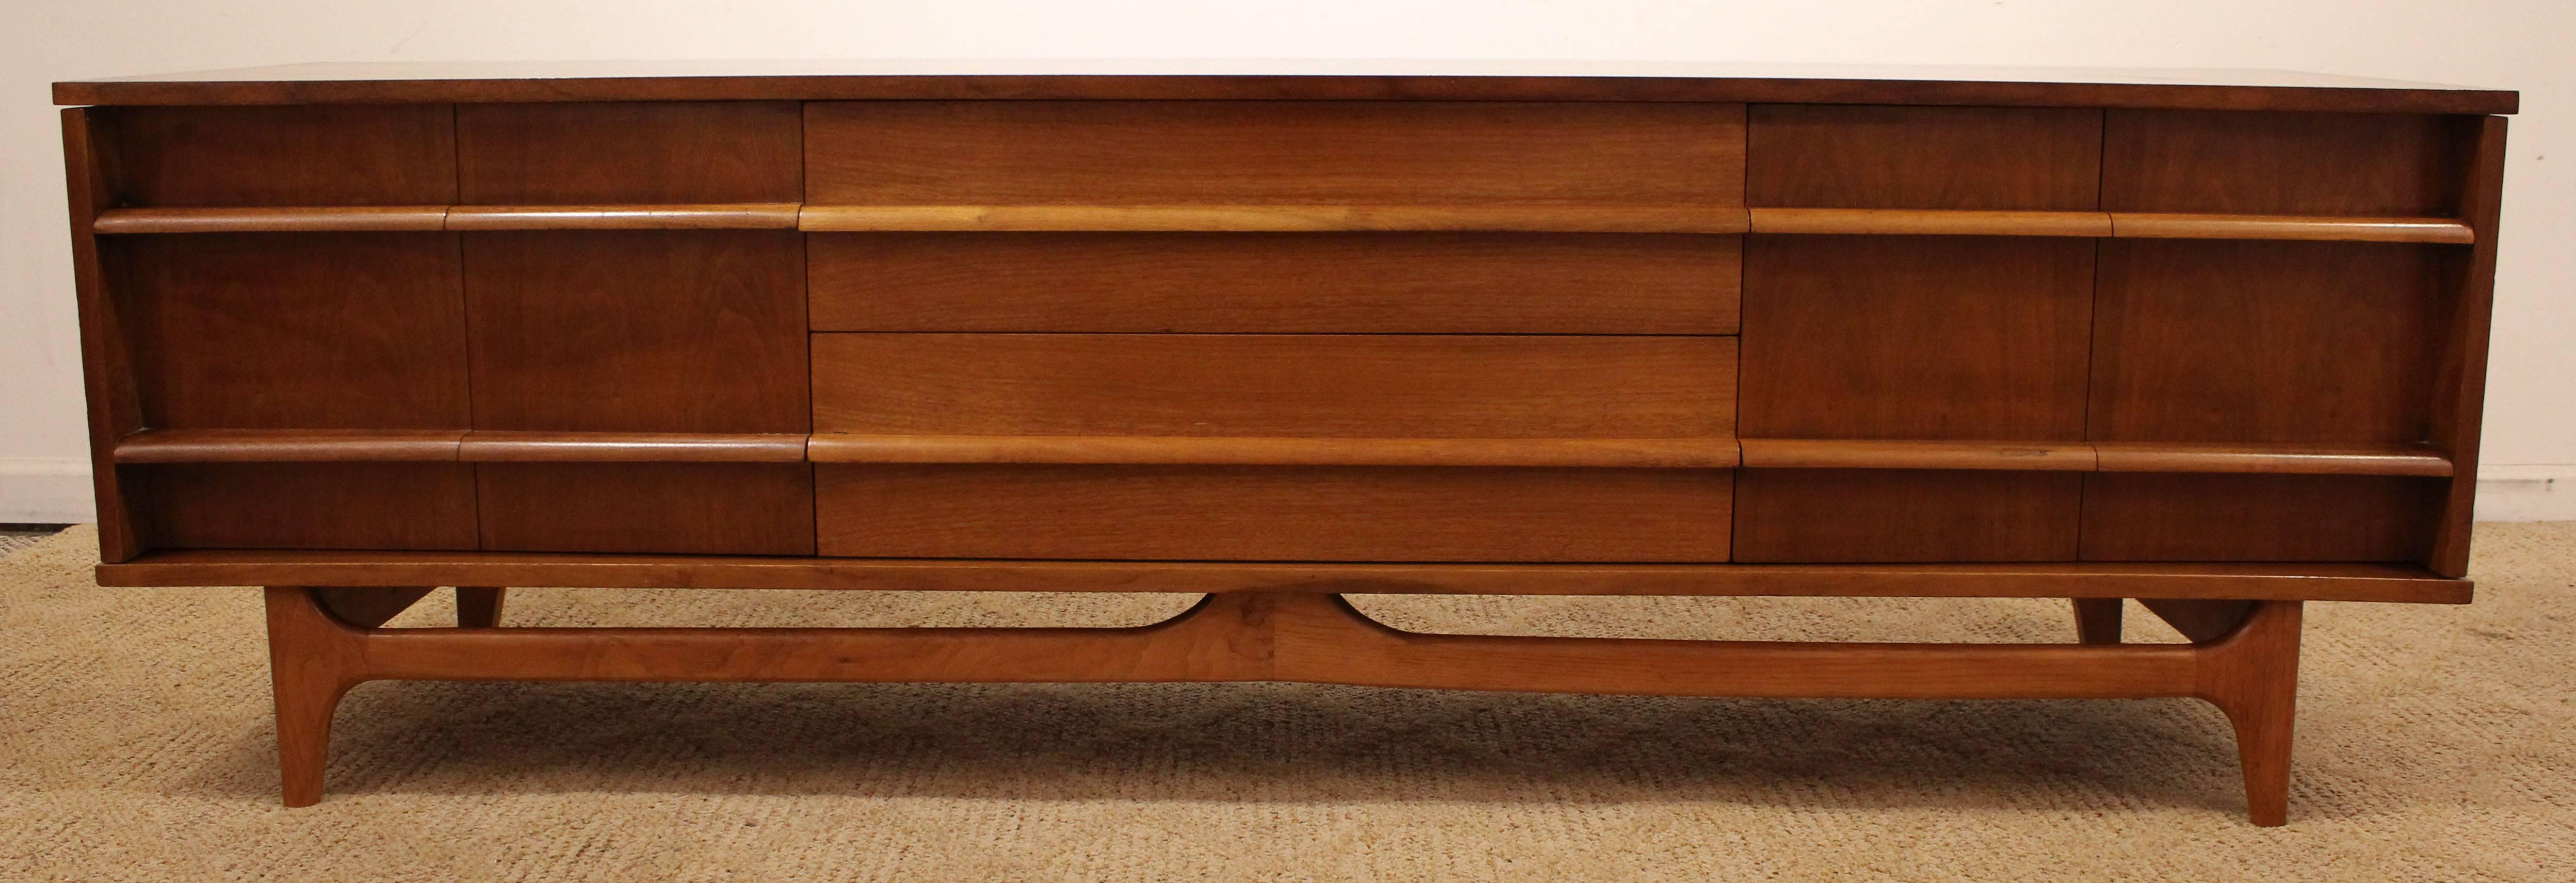 Offered is a beautiful Mid-Century Modern credenza. This piece is made of walnut, featuring a concave front, two bi-folding doors  and three center drawers with sculpted pulls. It is in excellent condition, top has been refinished, showing some age